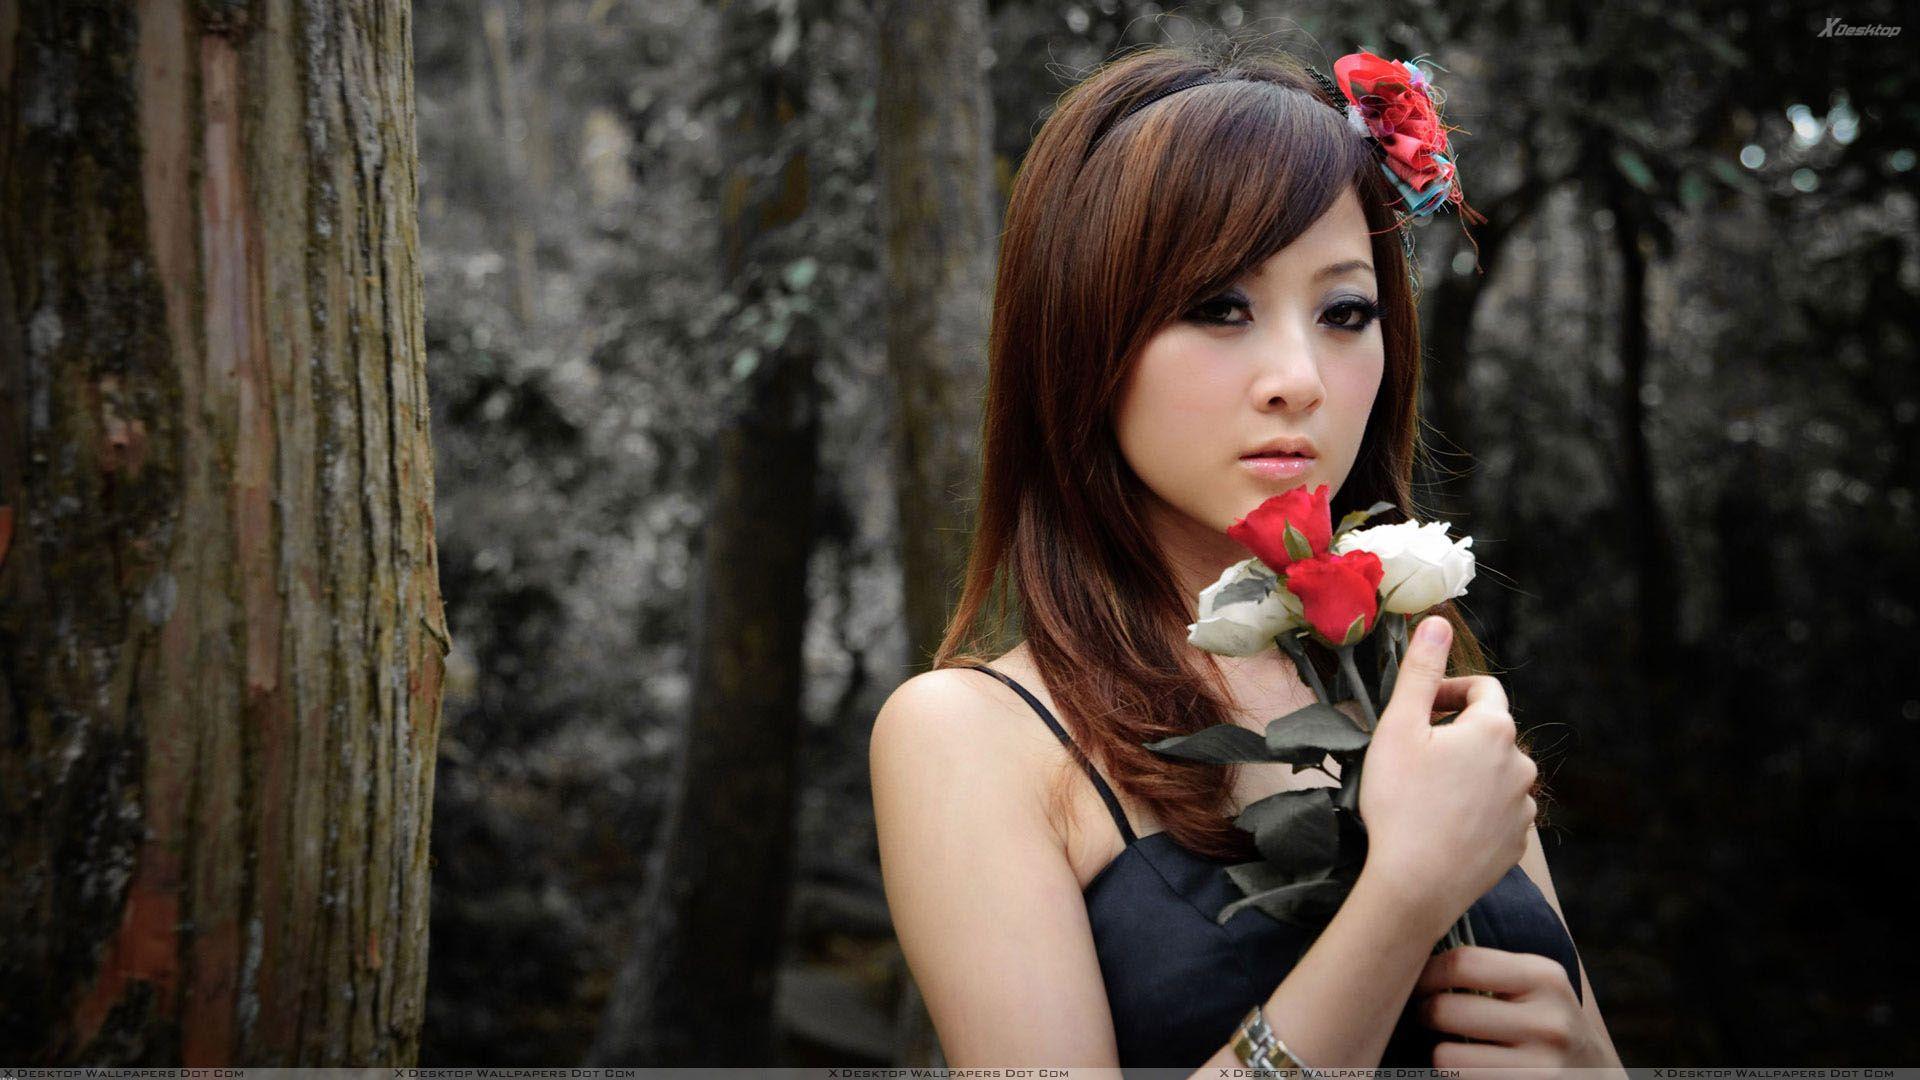 Asian Girl With Red And White Roses in Forest Wallpaper